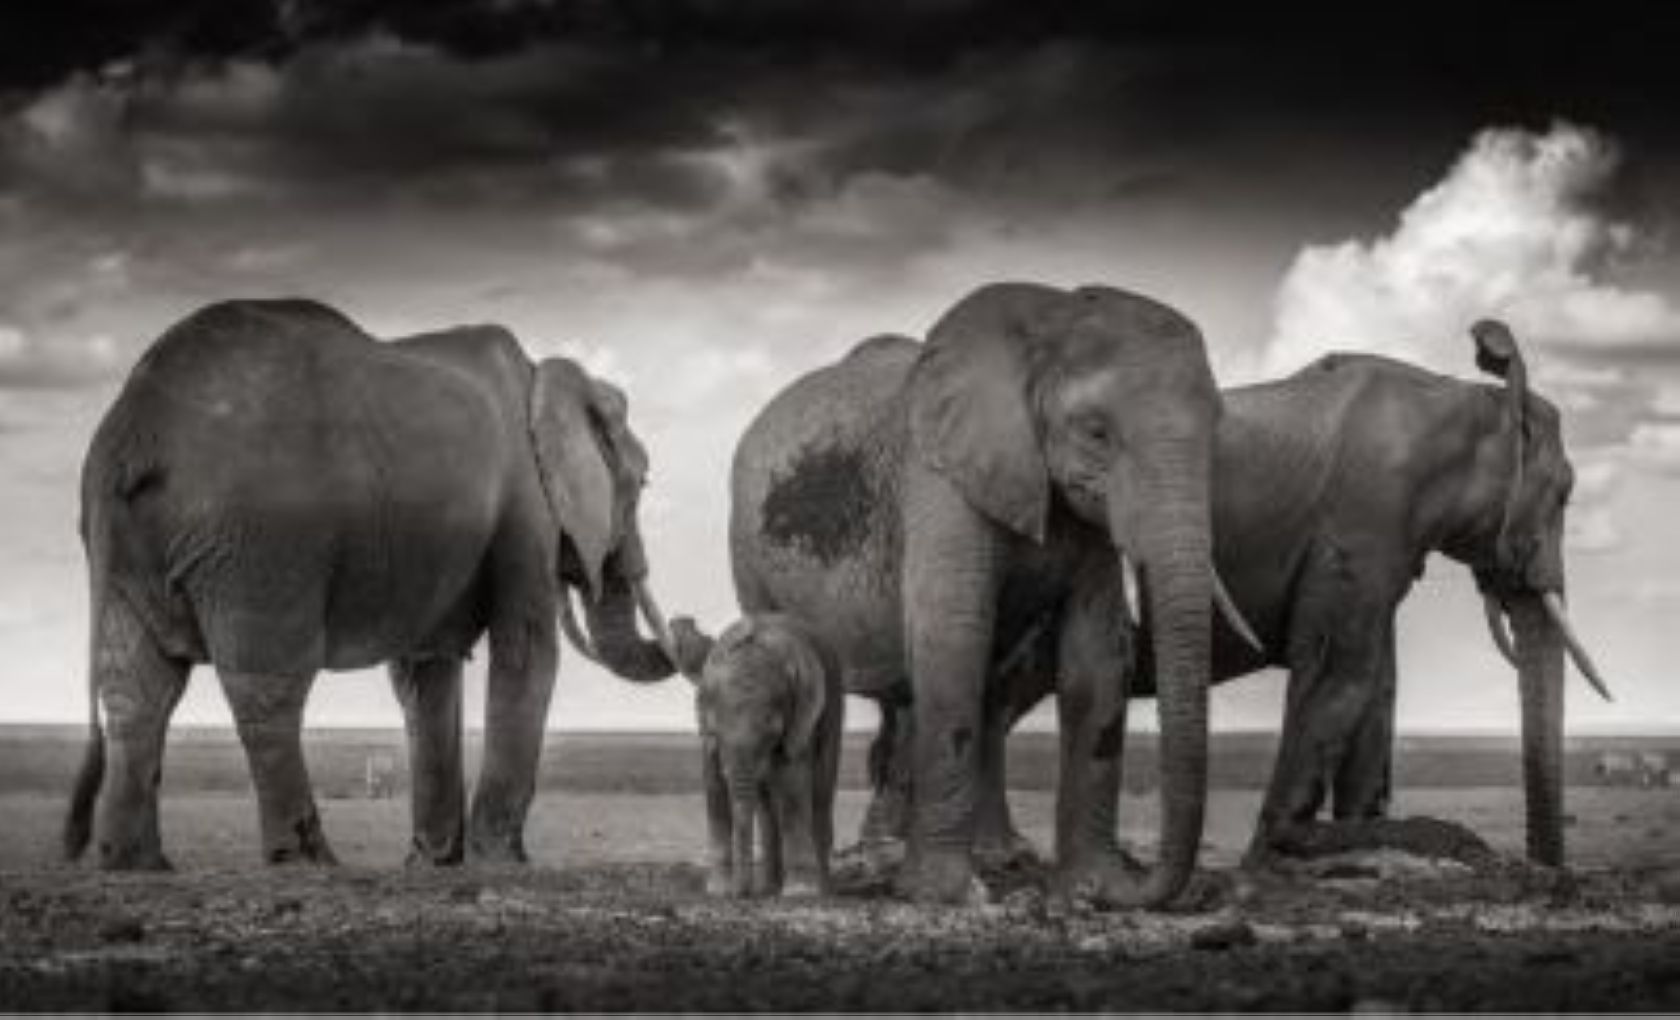 Sleeping Family by Joachim Schmeisser, family of elephants in the steppe